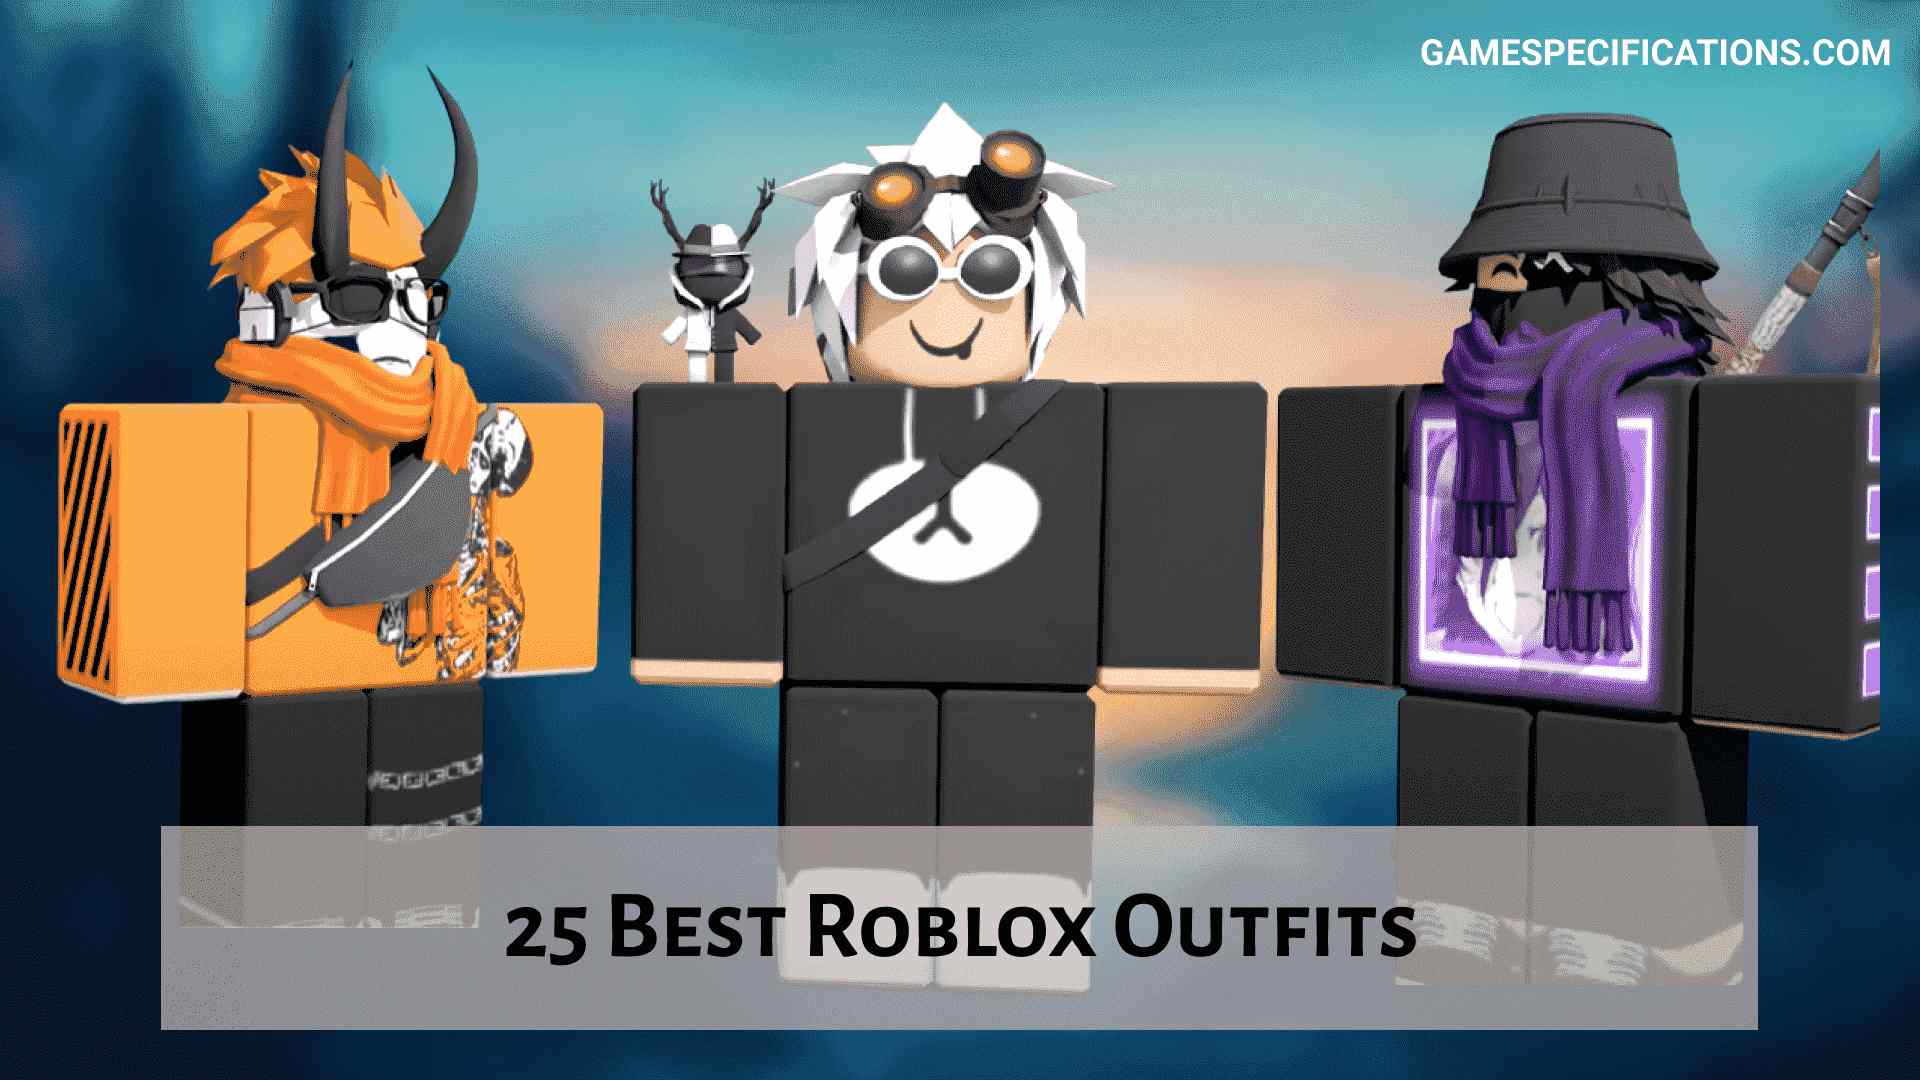 Best 25 Roblox Outfits You Ll Ever Need 2021 Game Specifications - roblox black robes